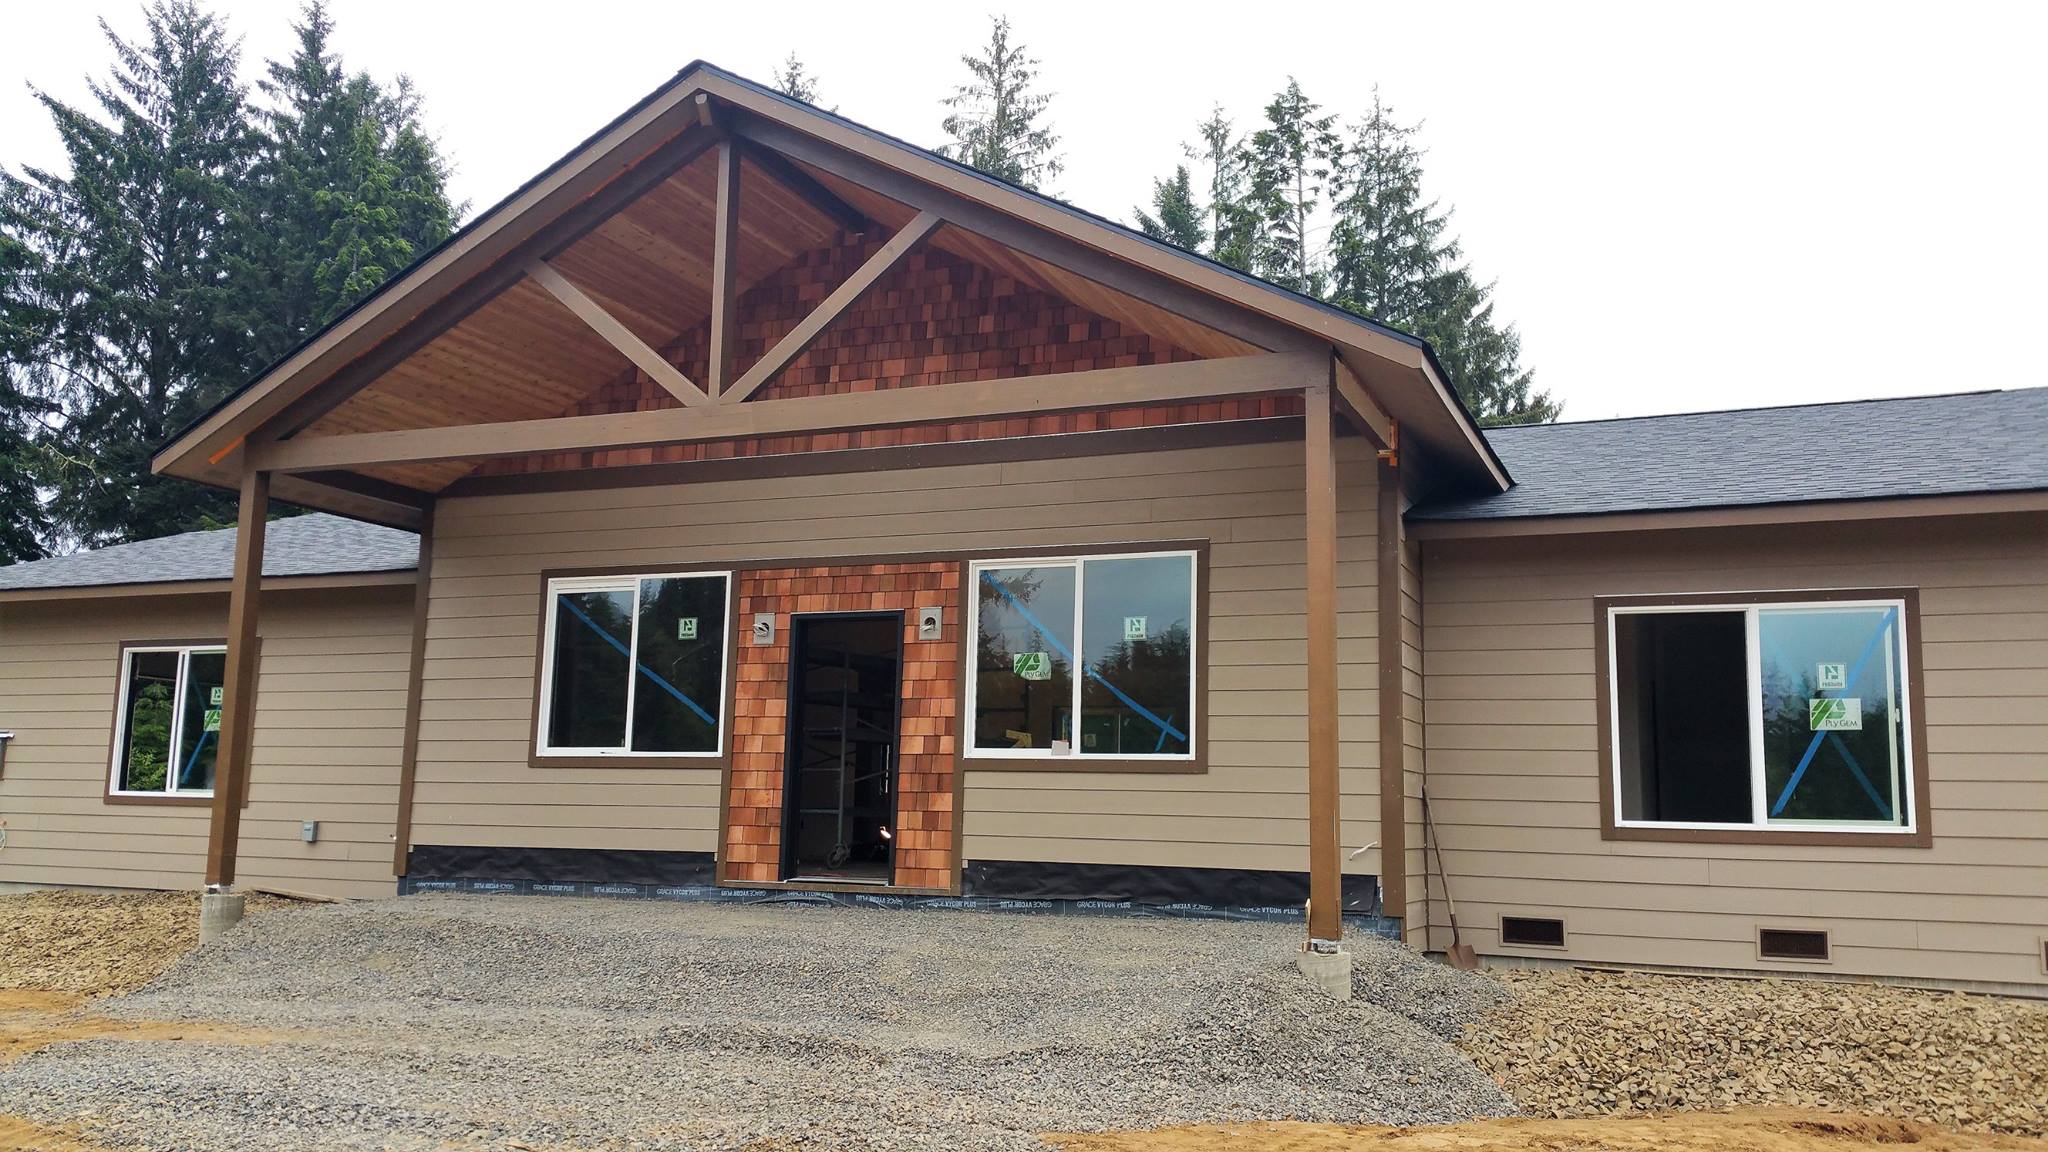 Hardi-board siding, new windows and doors on new construction project in South Bend, WA.